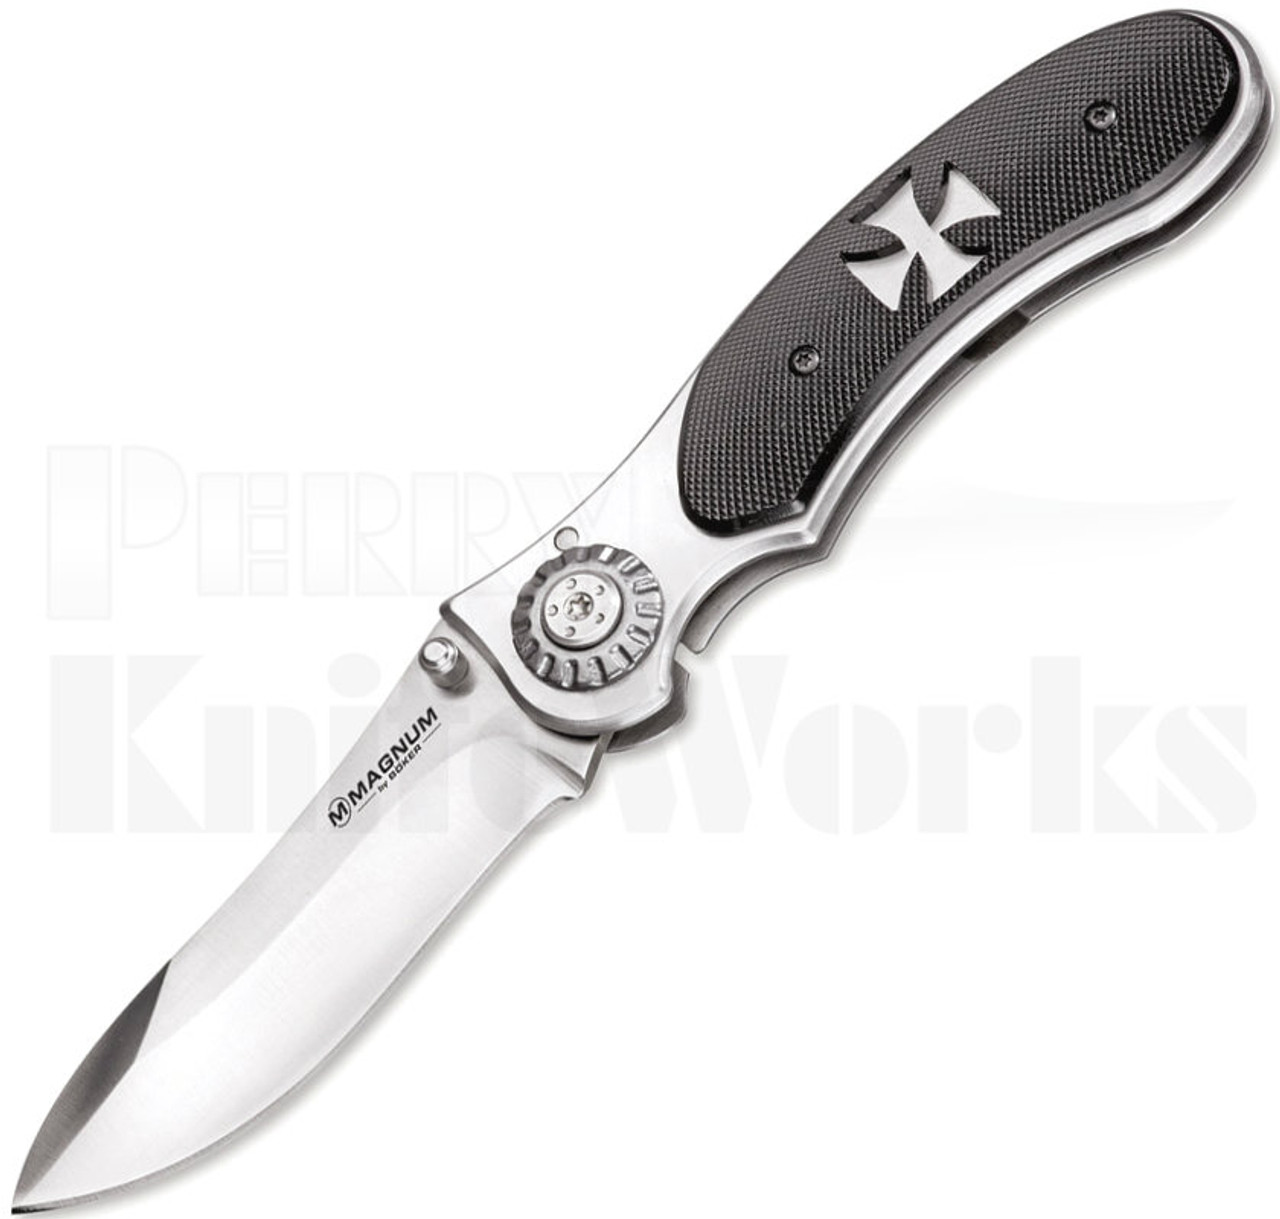 Boker Magnum Iron Cross Spring Assisted Knife 01RY921